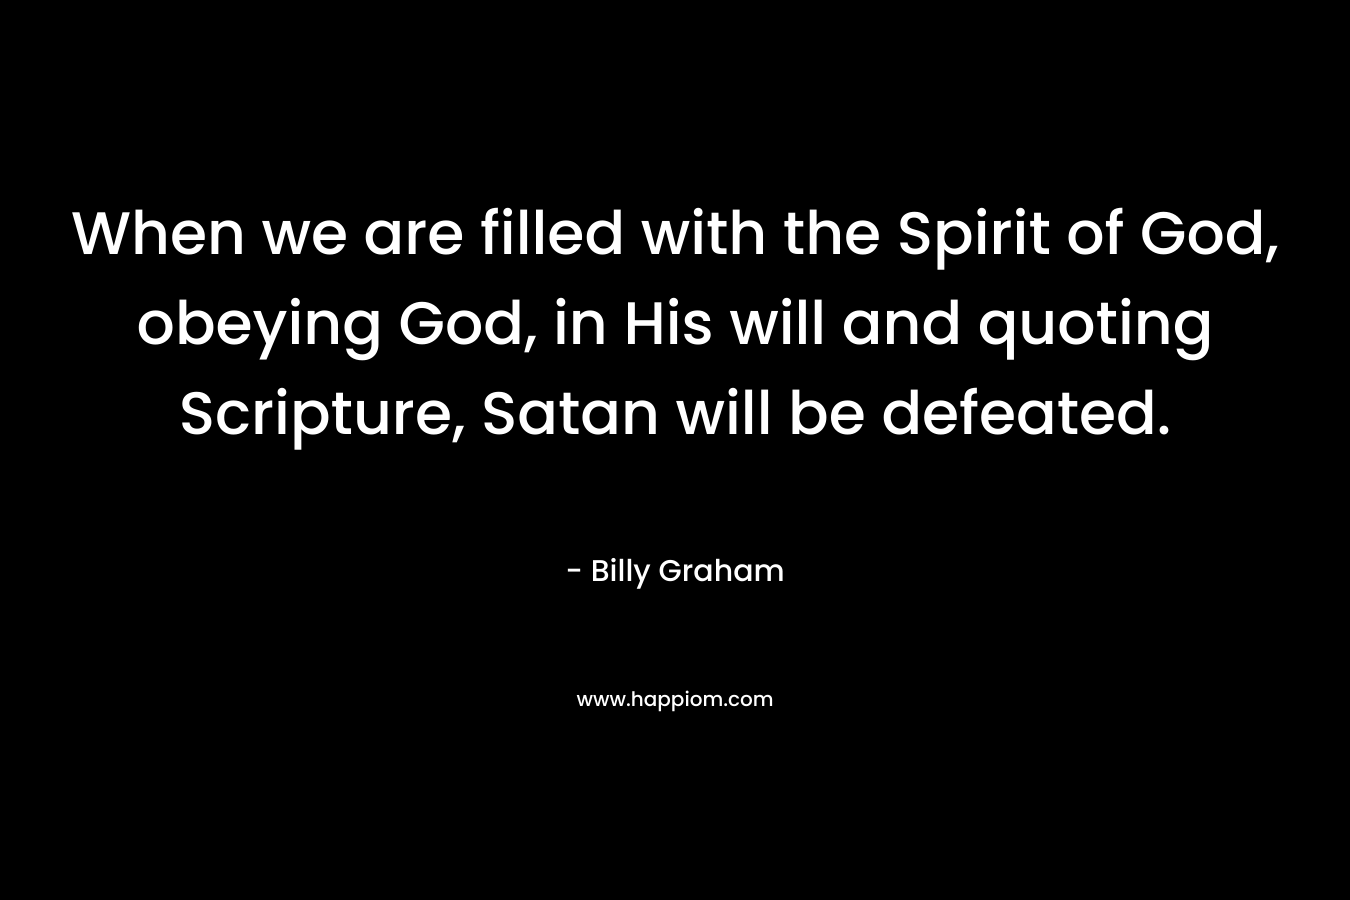 When we are filled with the Spirit of God, obeying God, in His will and quoting Scripture, Satan will be defeated. – Billy Graham